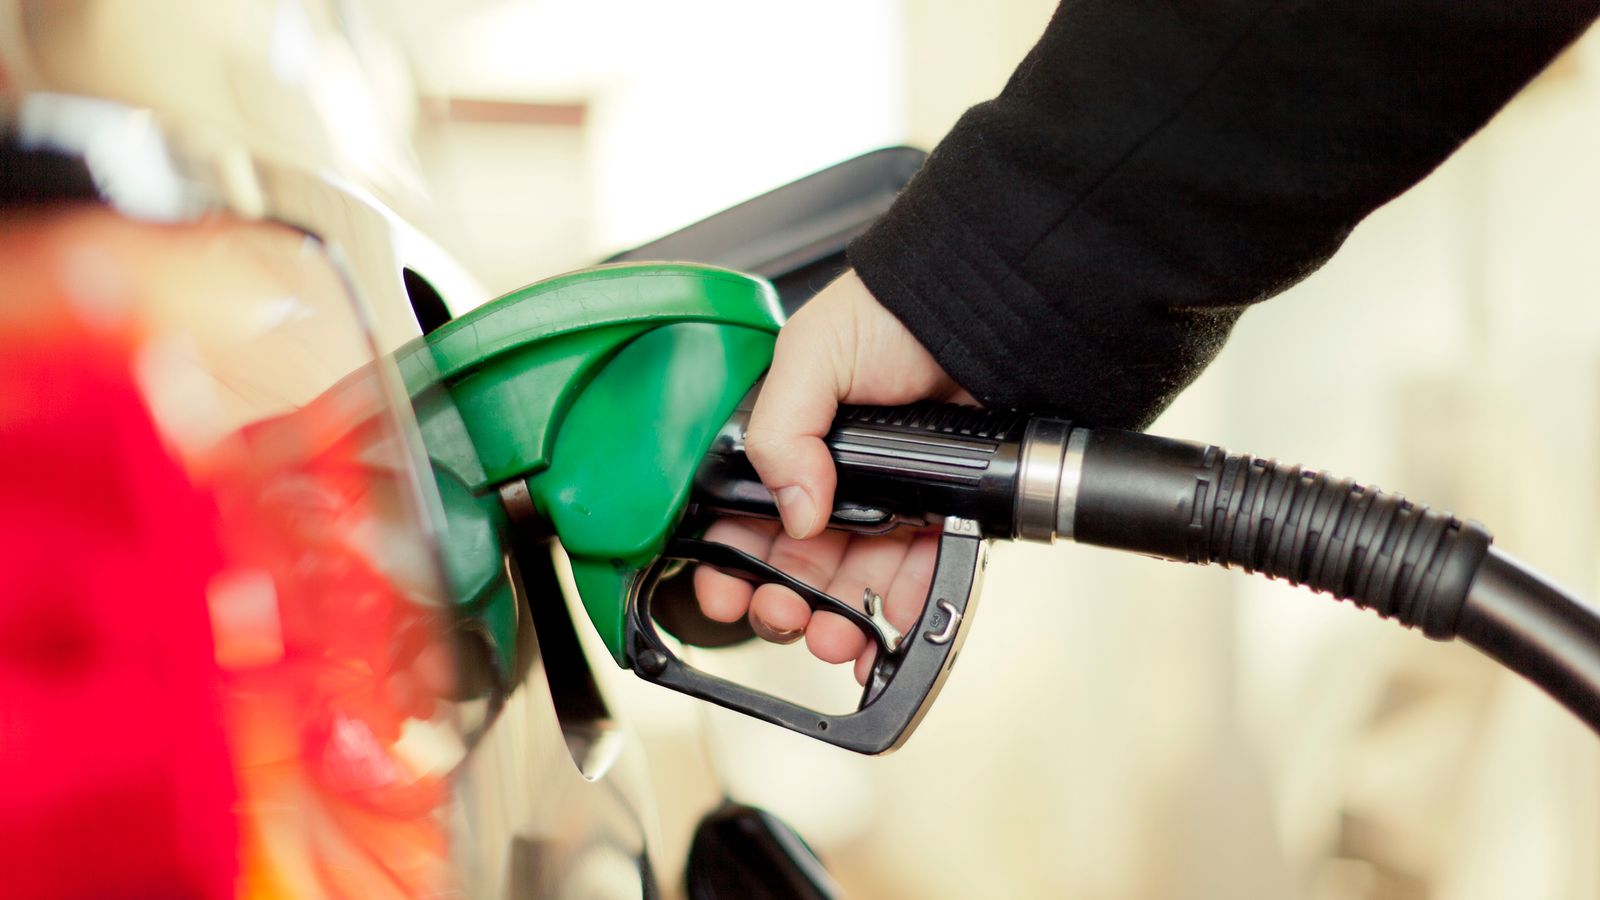 Petrol prices hit 'frightening' new record high of 177.9p a litre, figures show